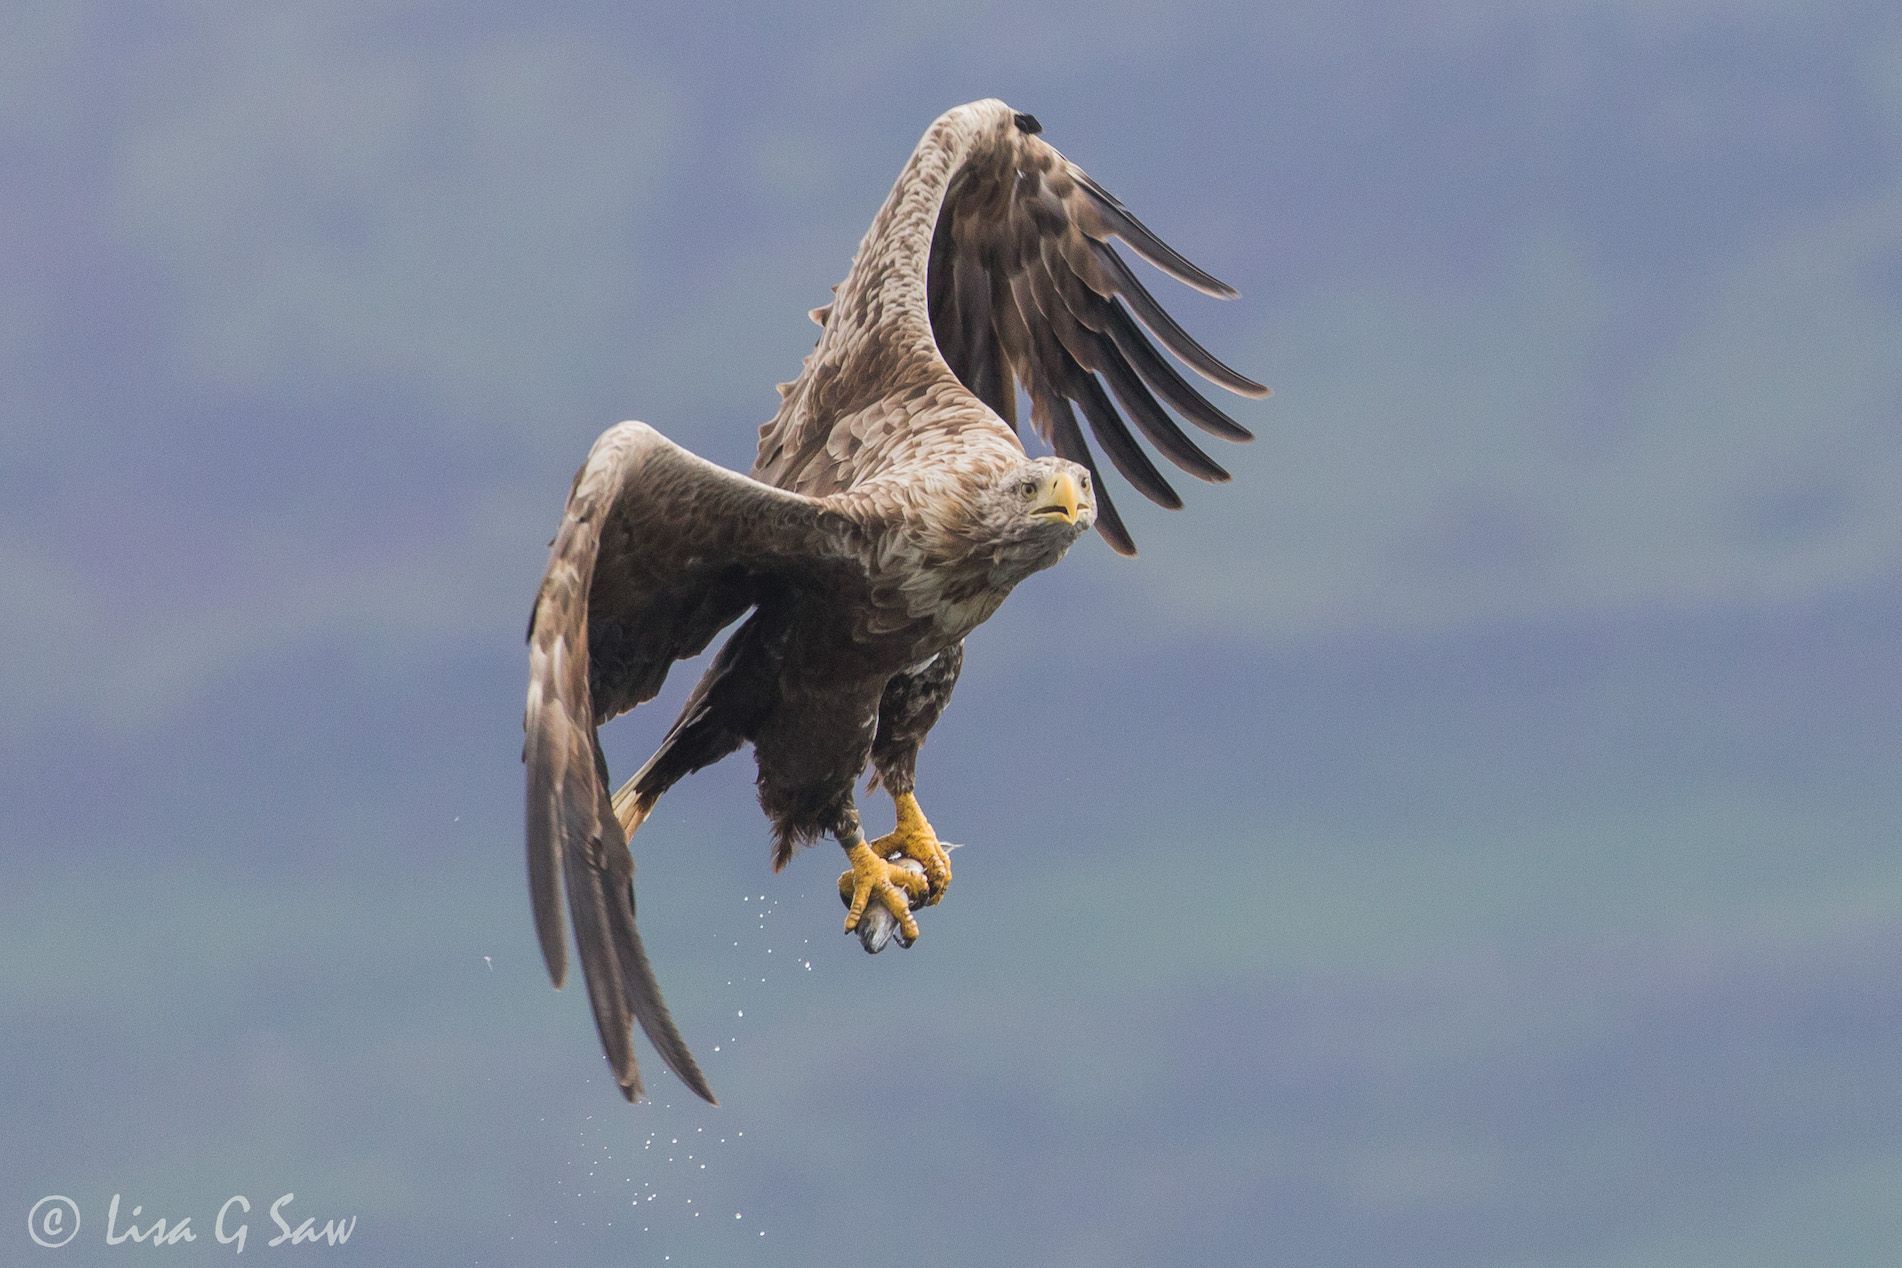 White Tailed Eagle flying off with fish in its talons